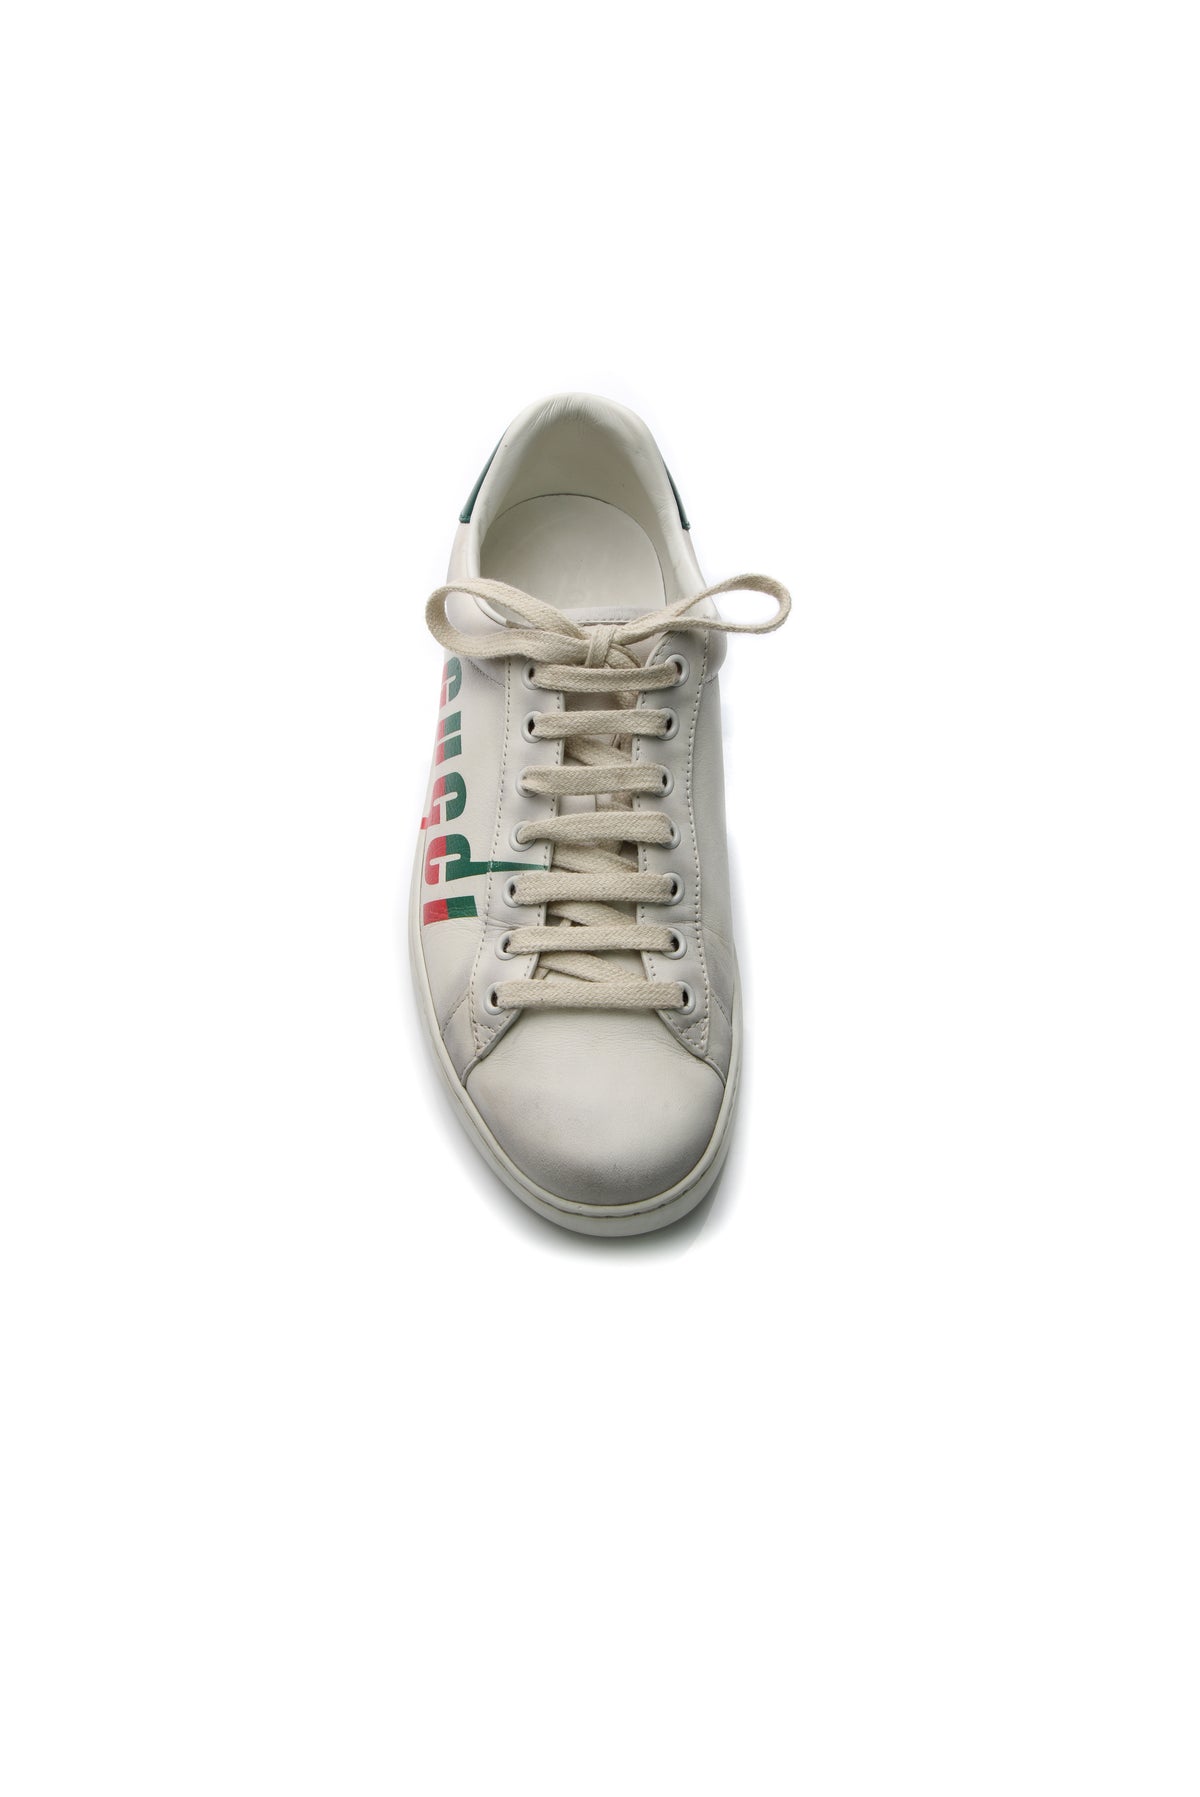 Gucci Men Ace Sneakers , White Leather, Size G 8.5 / US 9.5